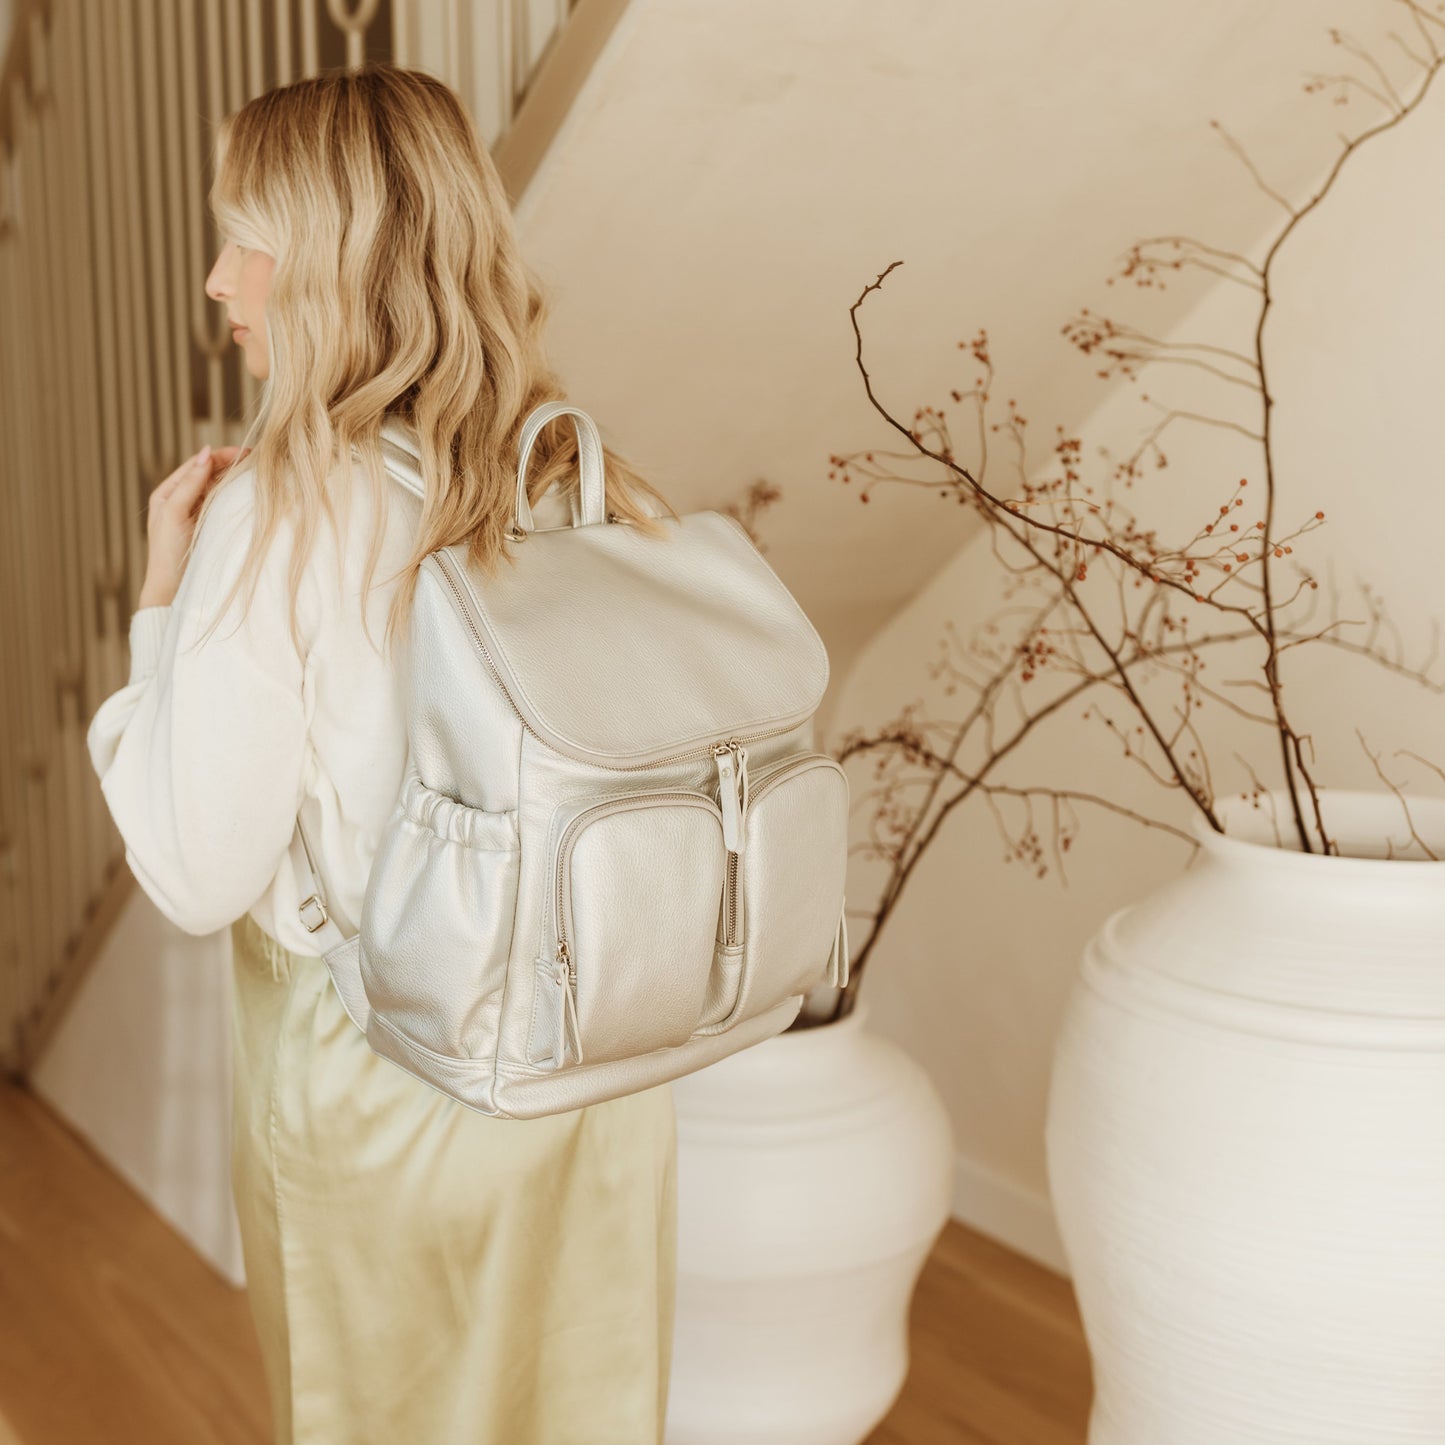 Dimple Faux Leather Diaper Backpack - Metallic